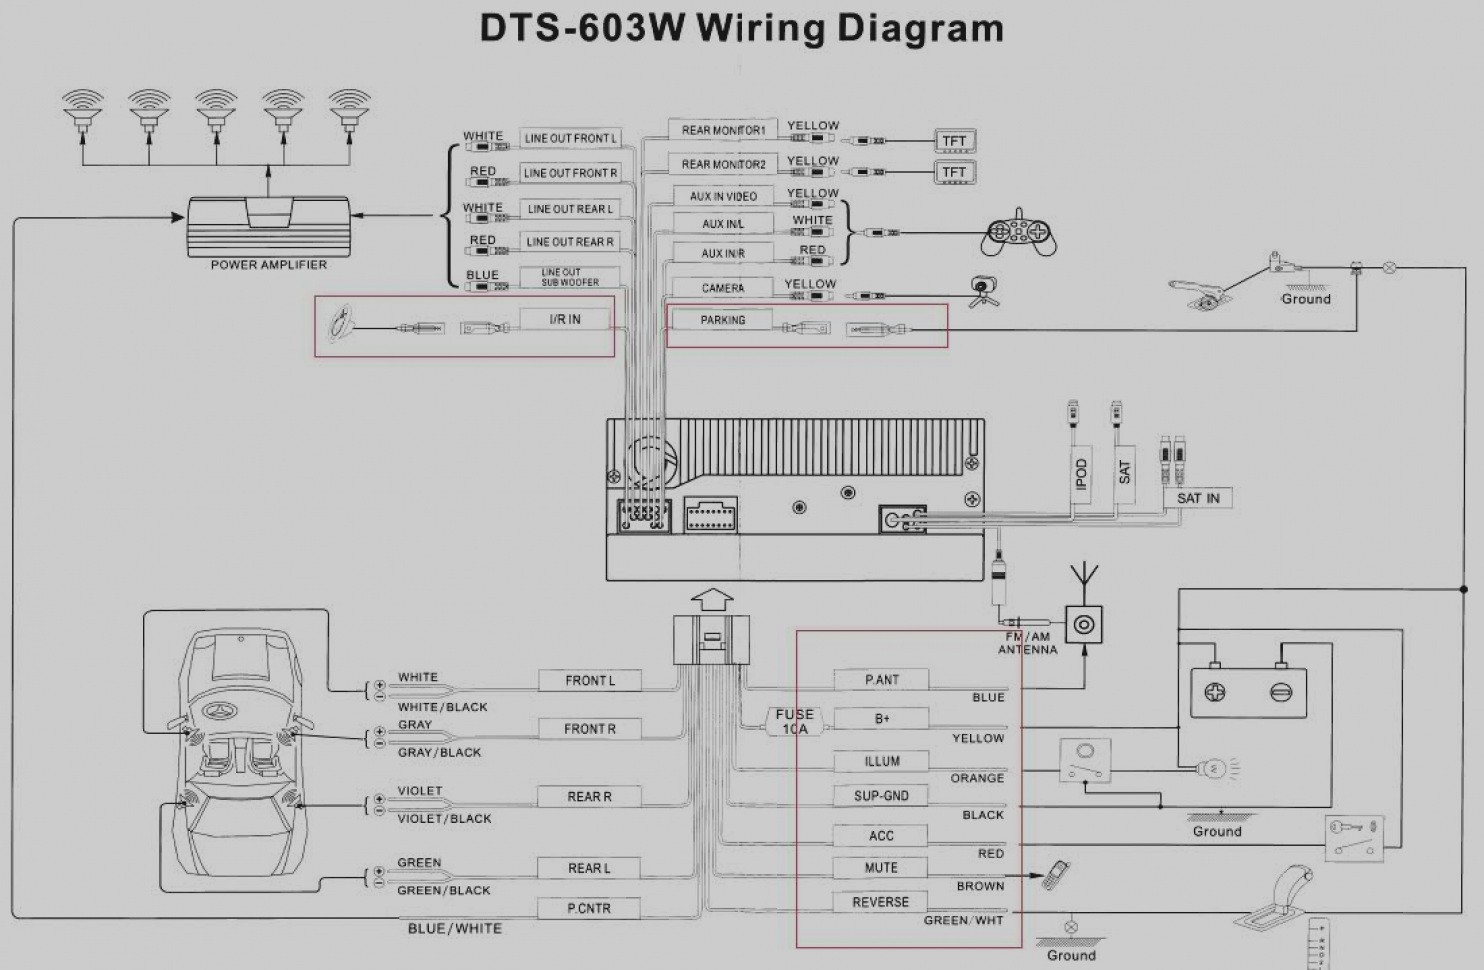 Best Axxess Gmos 04 Wiring Diagram Pdf Free AX ADCT2 Integrate With Gansoukin Me New